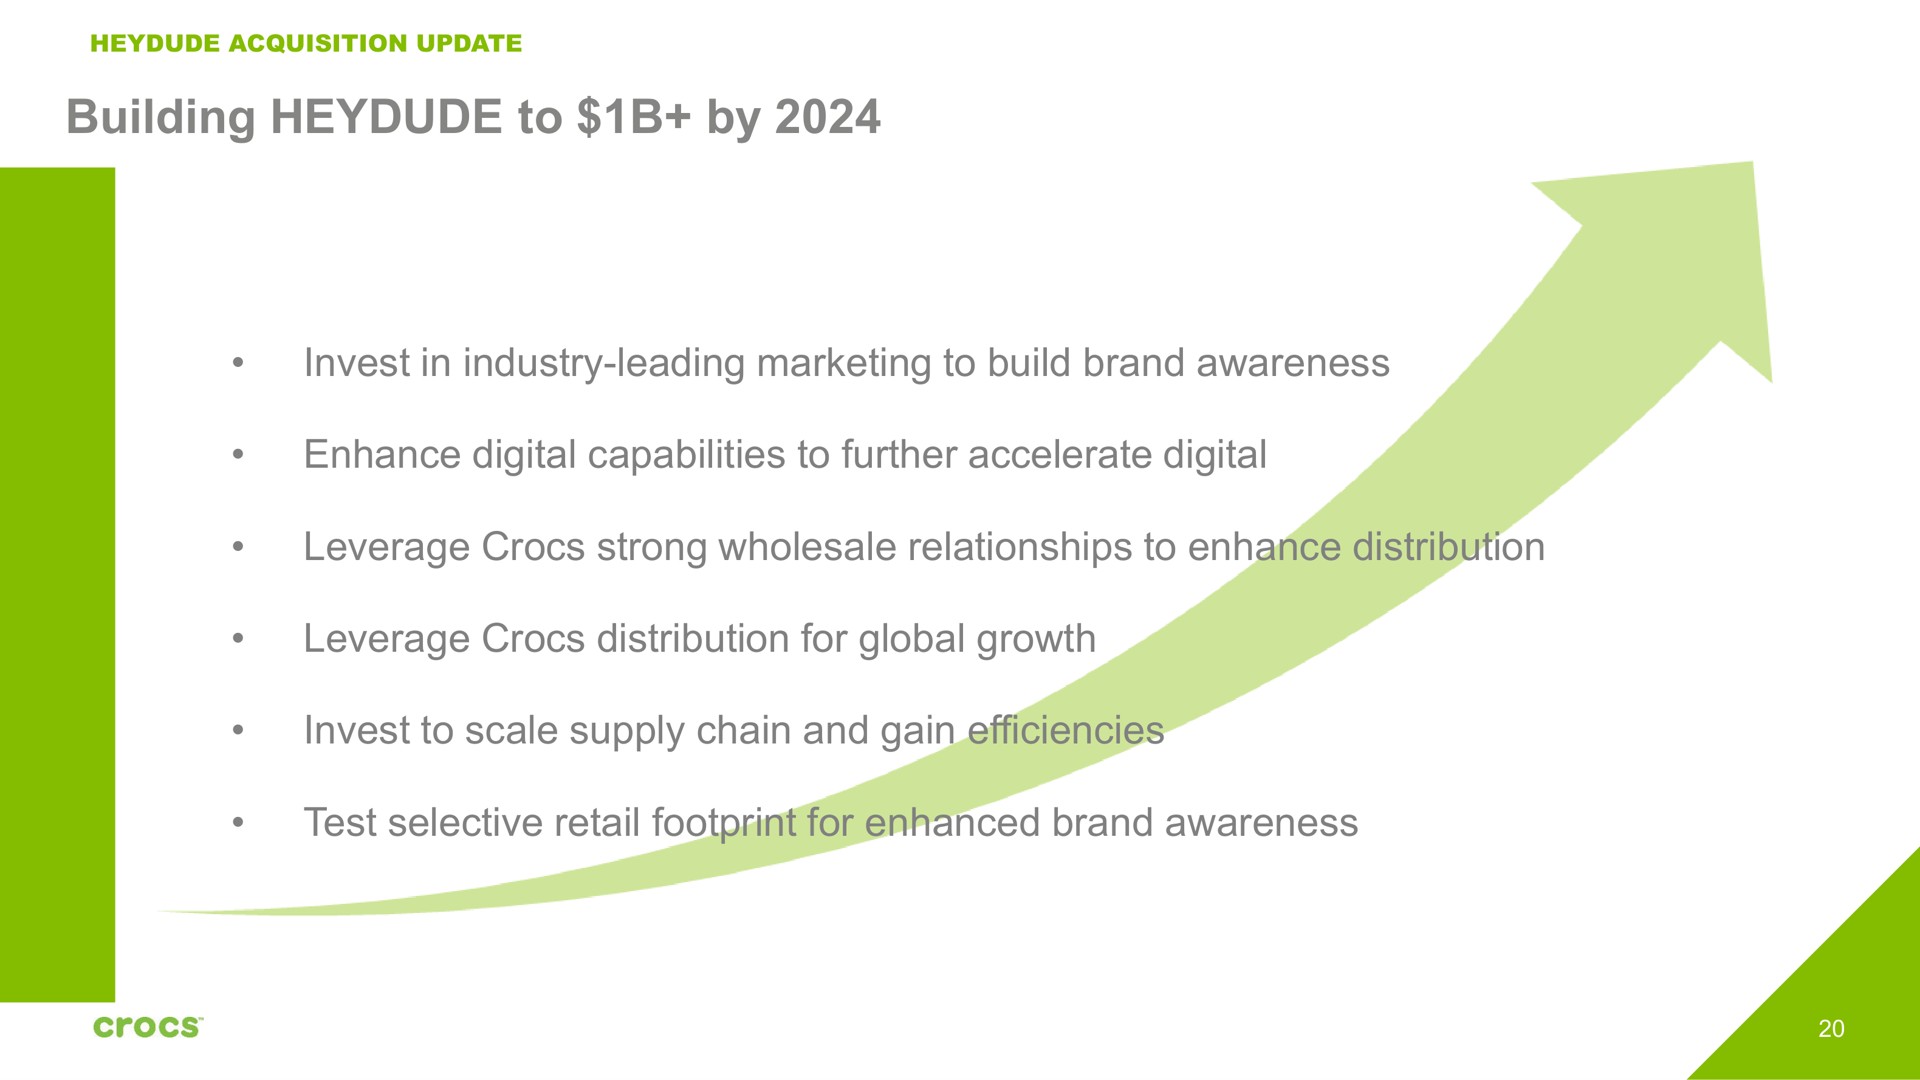 building to by invest in industry leading marketing to build brand awareness enhance digital capabilities to further accelerate digital leverage strong wholesale relationships to enhance distribution leverage distribution for global growth invest to scale supply chain and gain efficiencies test selective retail footprint for enhanced brand awareness | Crocs